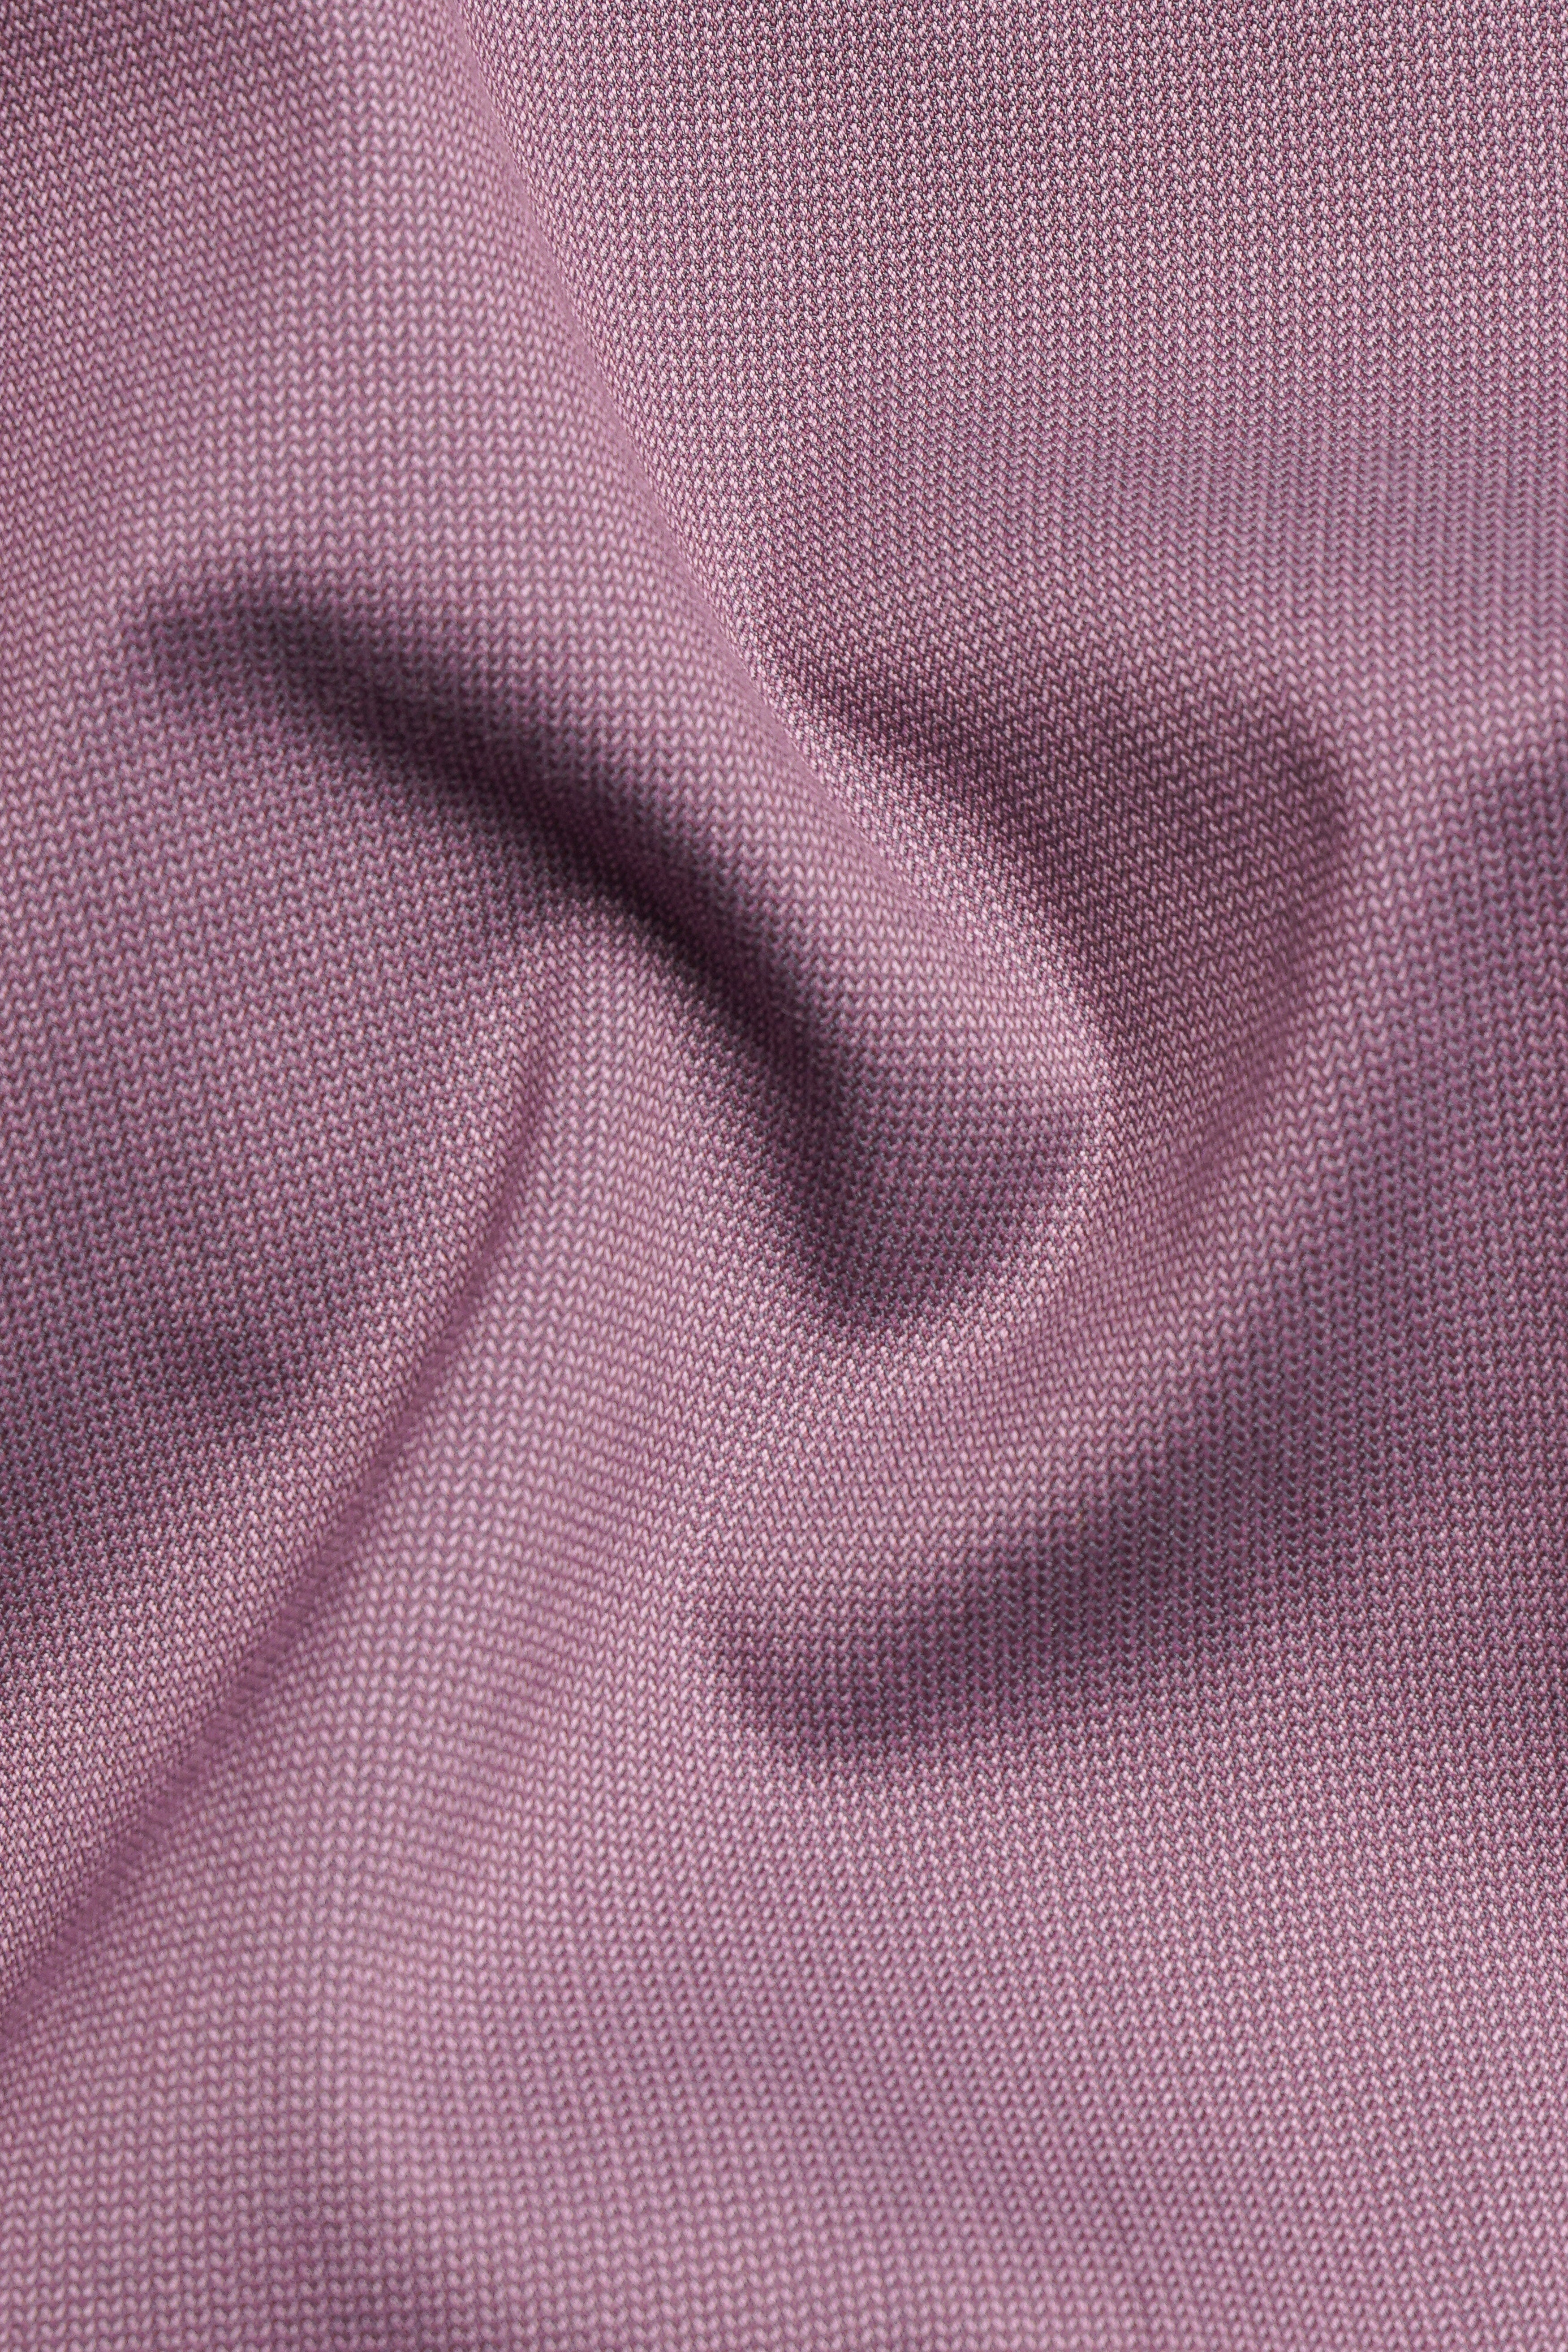 Orchid Lavender Premium Cotton Double Breasted Sports Suit ST3071-DB-PP-36, ST3071-DB-PP-38, ST3071-DB-PP-40, ST3071-DB-PP-42, ST3071-DB-PP-44, ST3071-DB-PP-46, ST3071-DB-PP-48, ST3071-DB-PP-50, ST3071-DB-PP-52, ST3071-DB-PP-54, ST3071-DB-PP-56, ST3071-DB-PP-58, ST3071-DB-PP-60